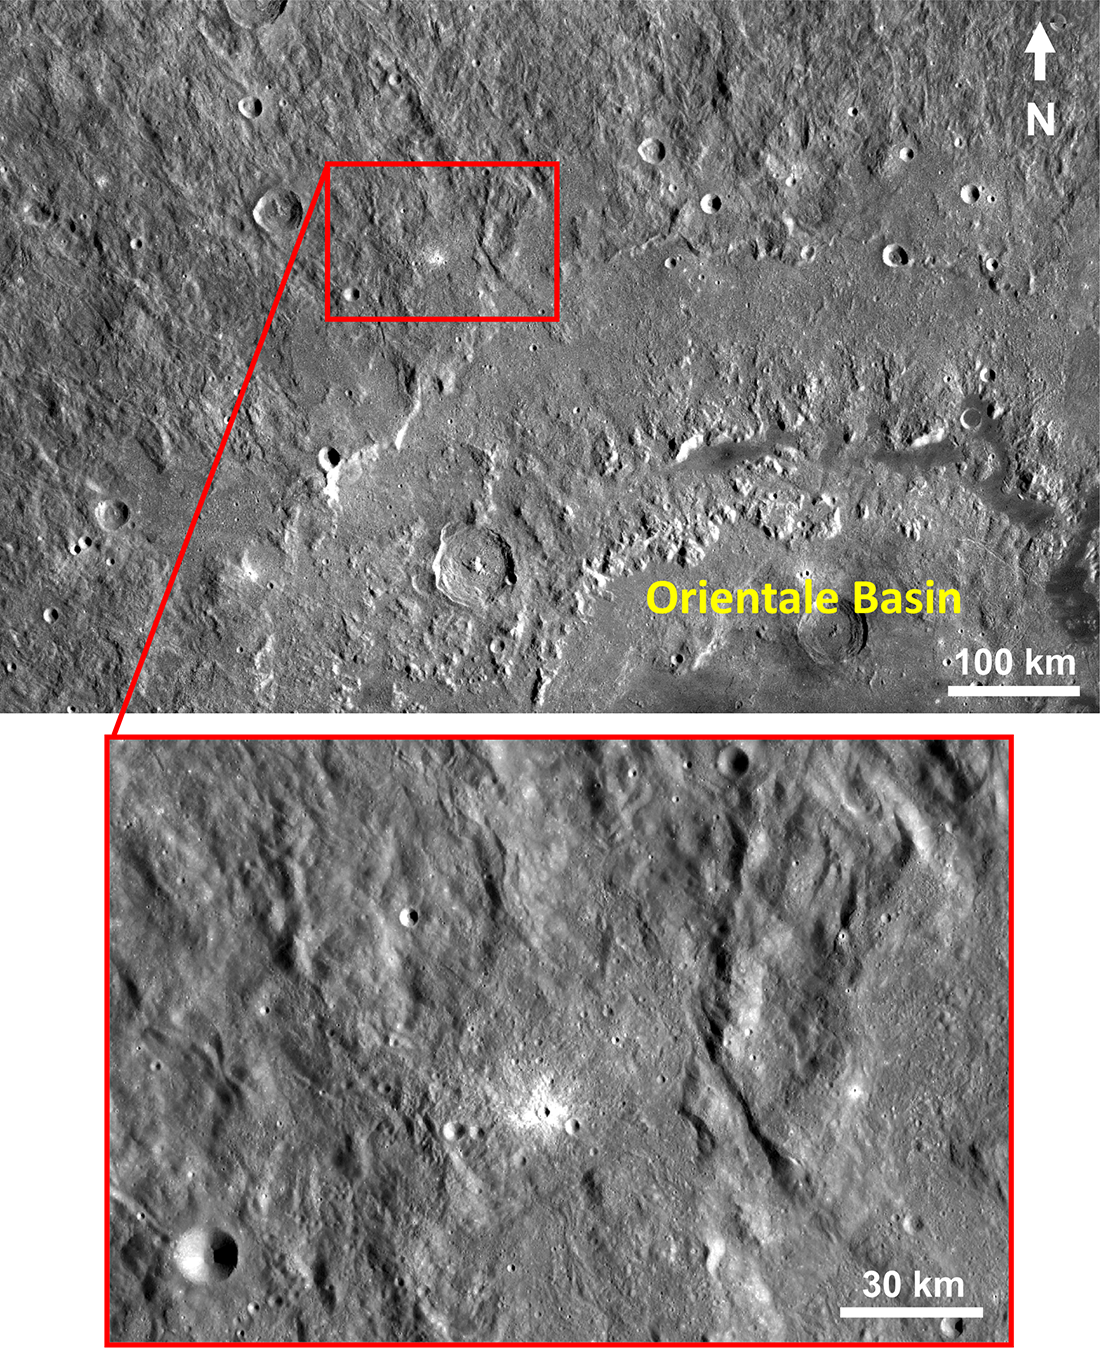 crater at Orientale